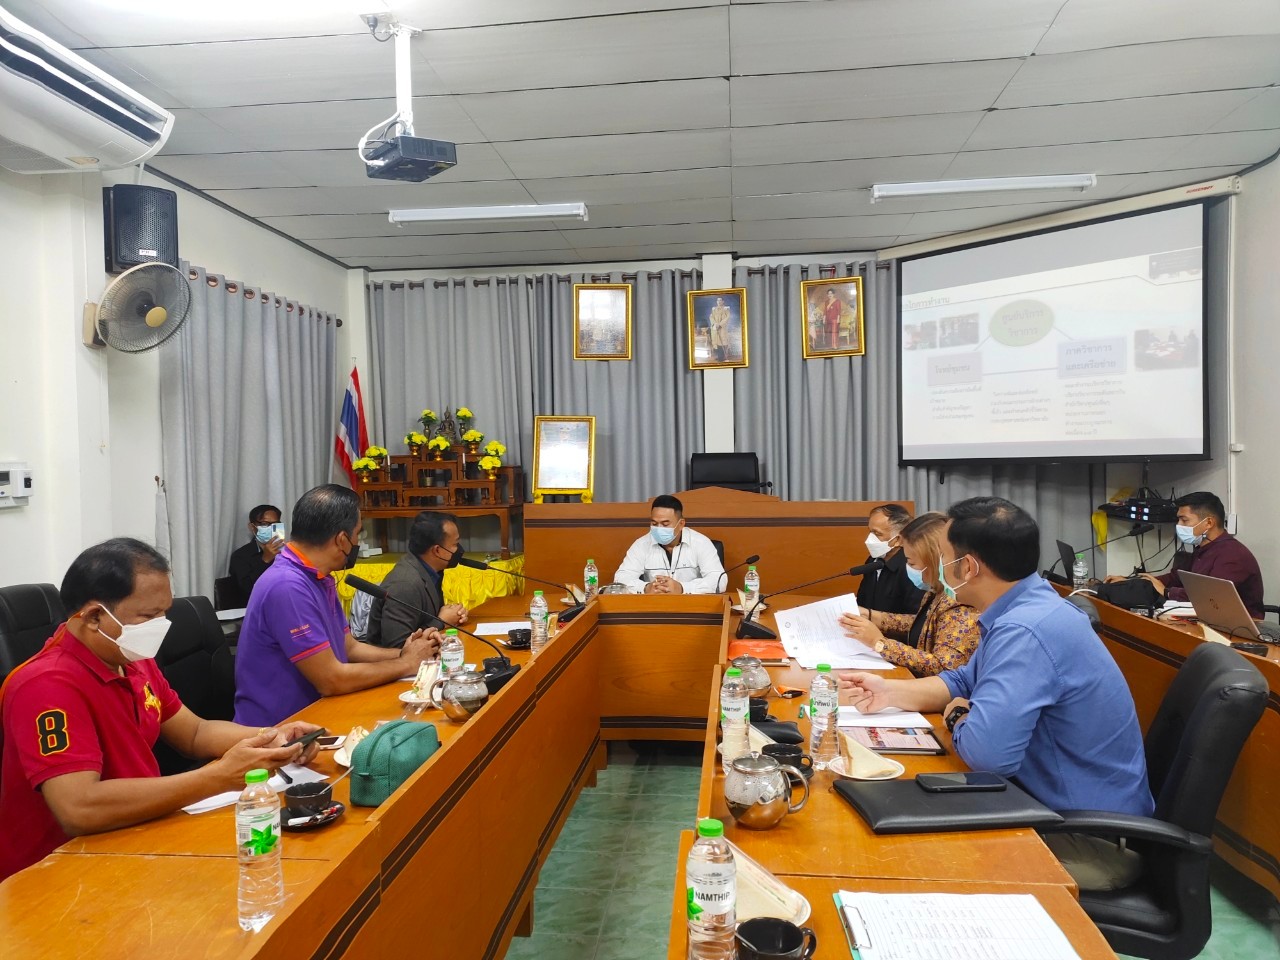 Walailak University collaborates with Thaiburi Subdistrict Administration Organization in Elevating the Education Quality of a Model Child Development Center with HighScope Curriculum